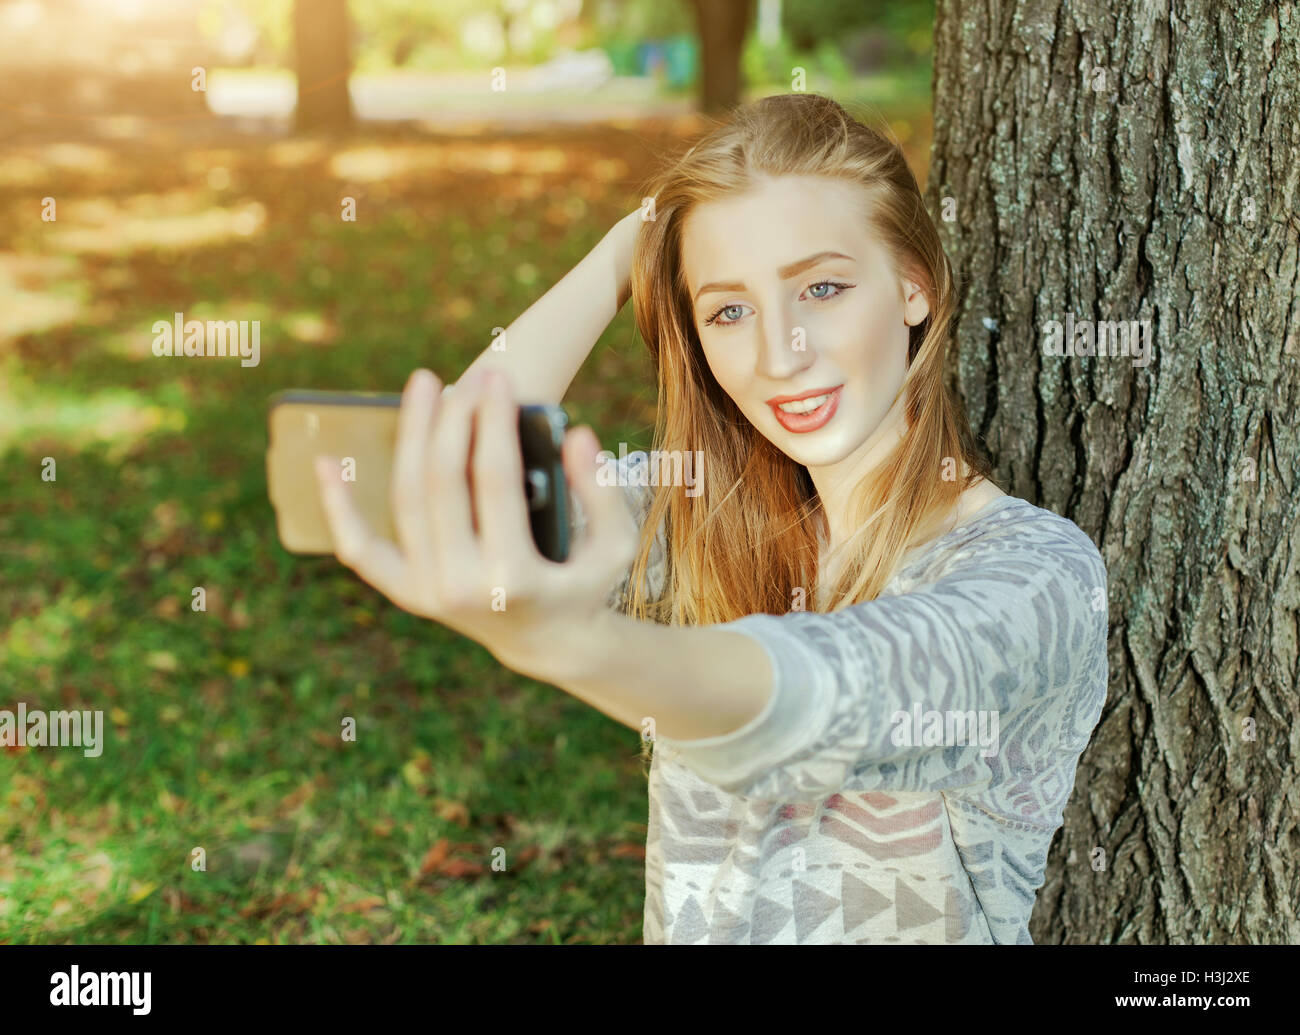 Beautiful girl with blue eyes makes selfie outdoors Stock Photo